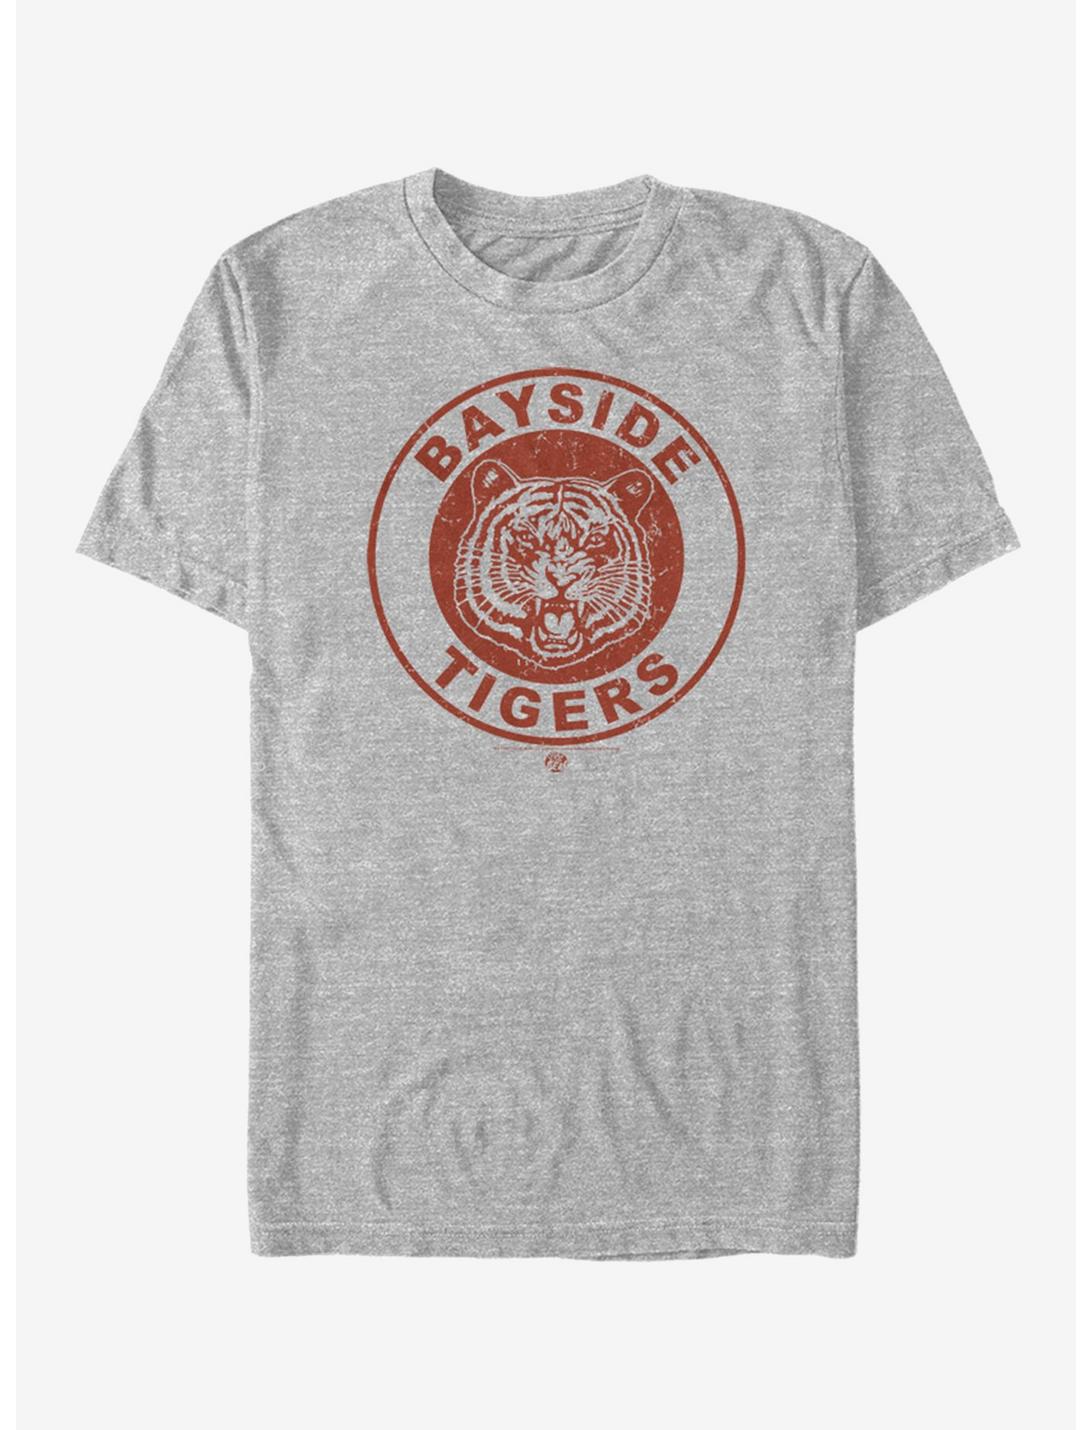 Saved By the Bell Bayside Tigers T-Shirt, ATH HTR, hi-res